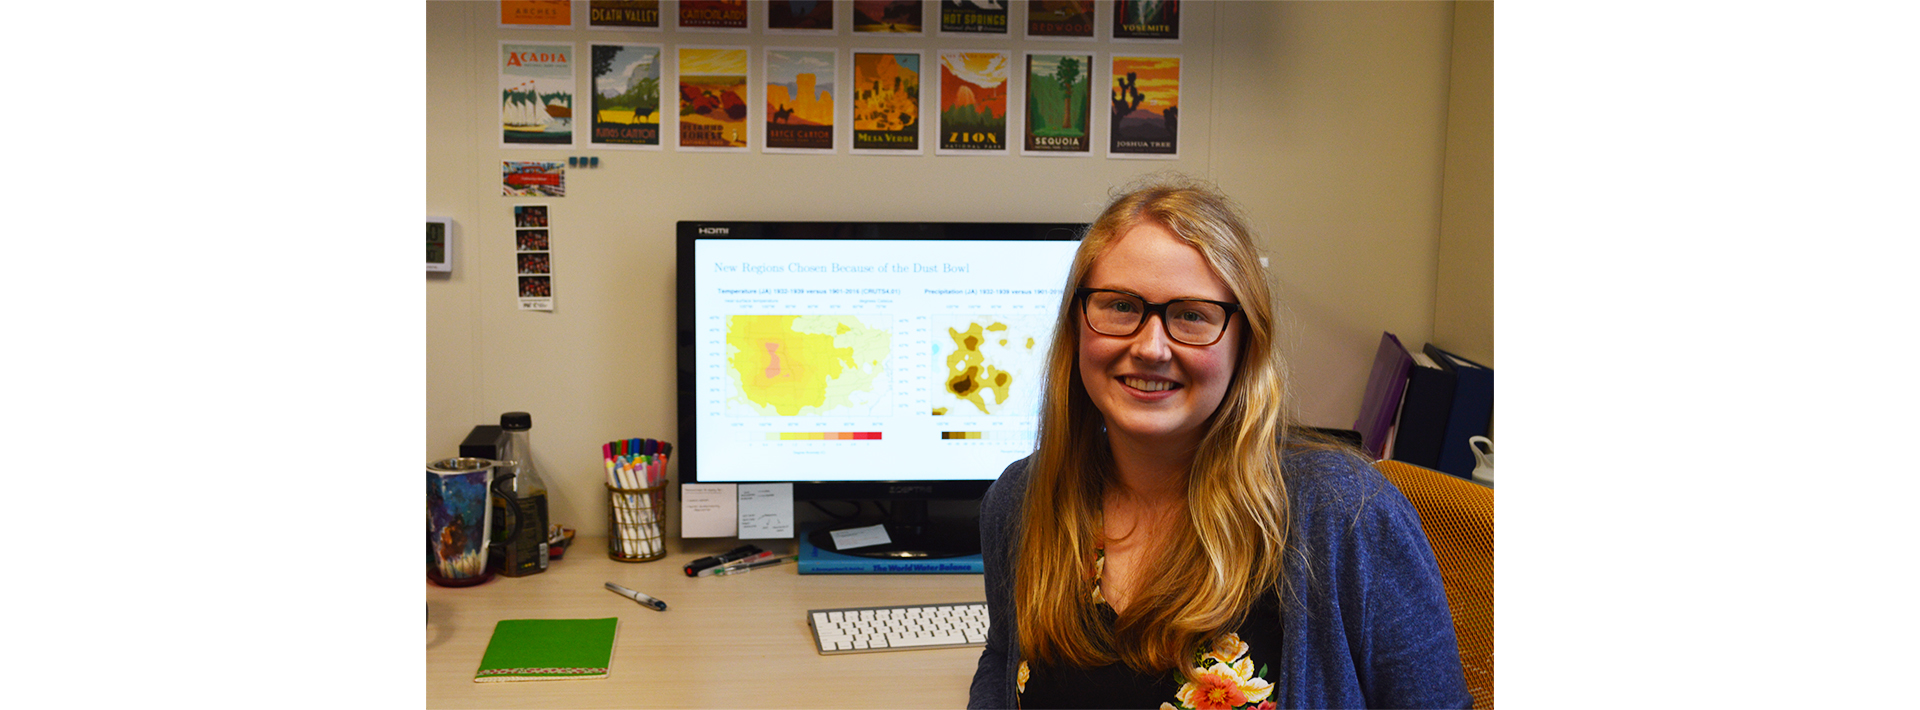 PhD student Catherine Nikiel discusses her research on climate change at the regional scale